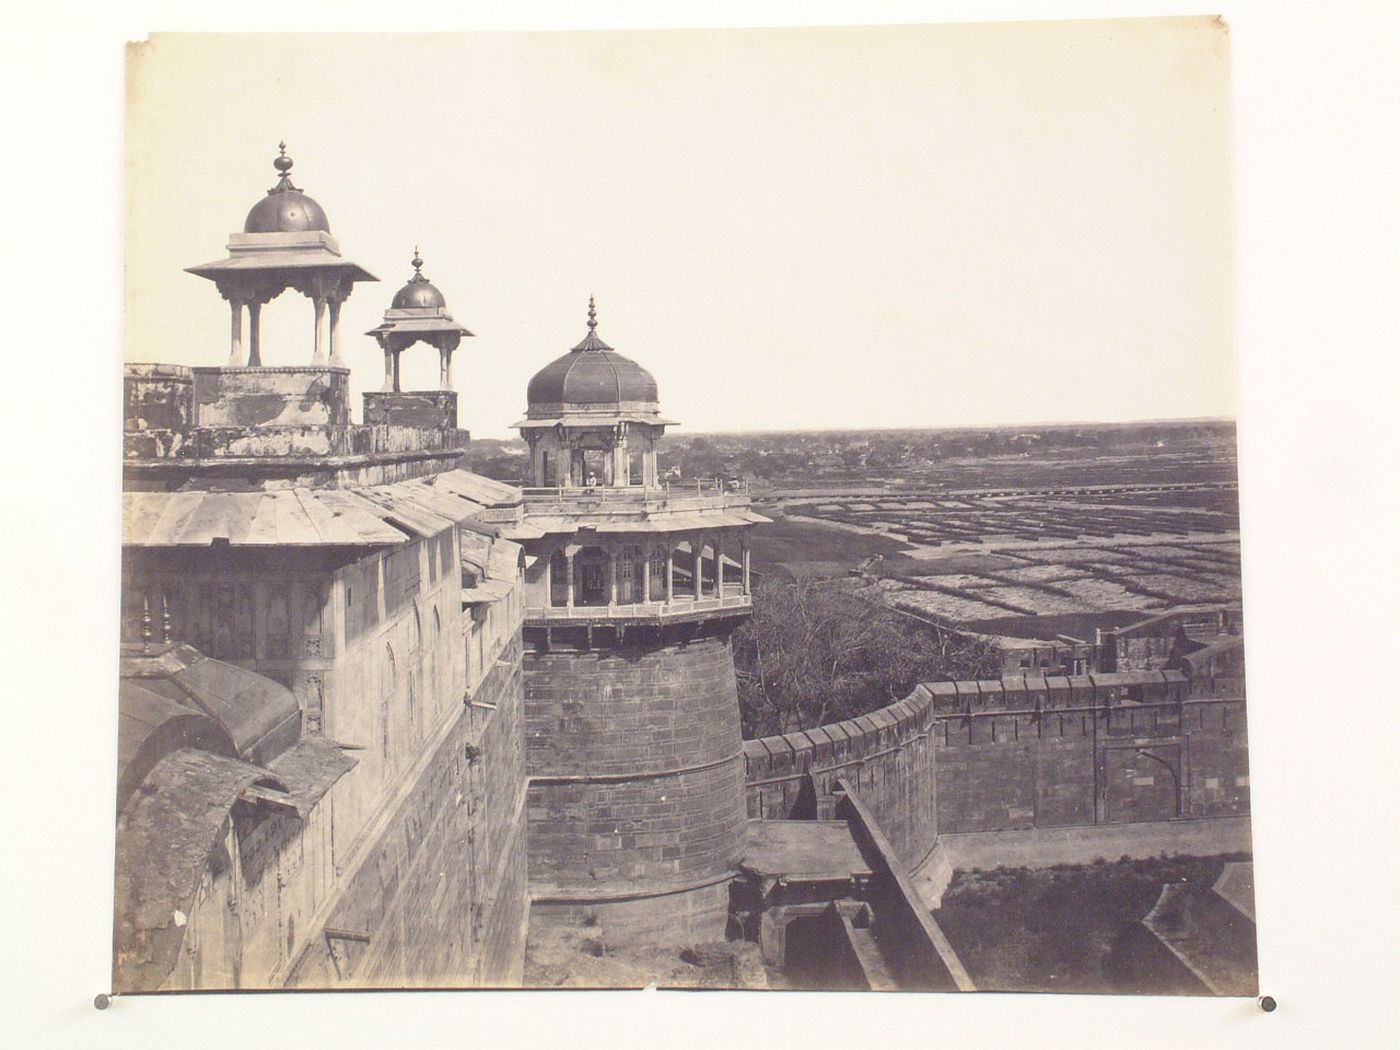 View of the Agra Fort showing the Zenana (also known as the Ladies' Pavilion), Agra, India